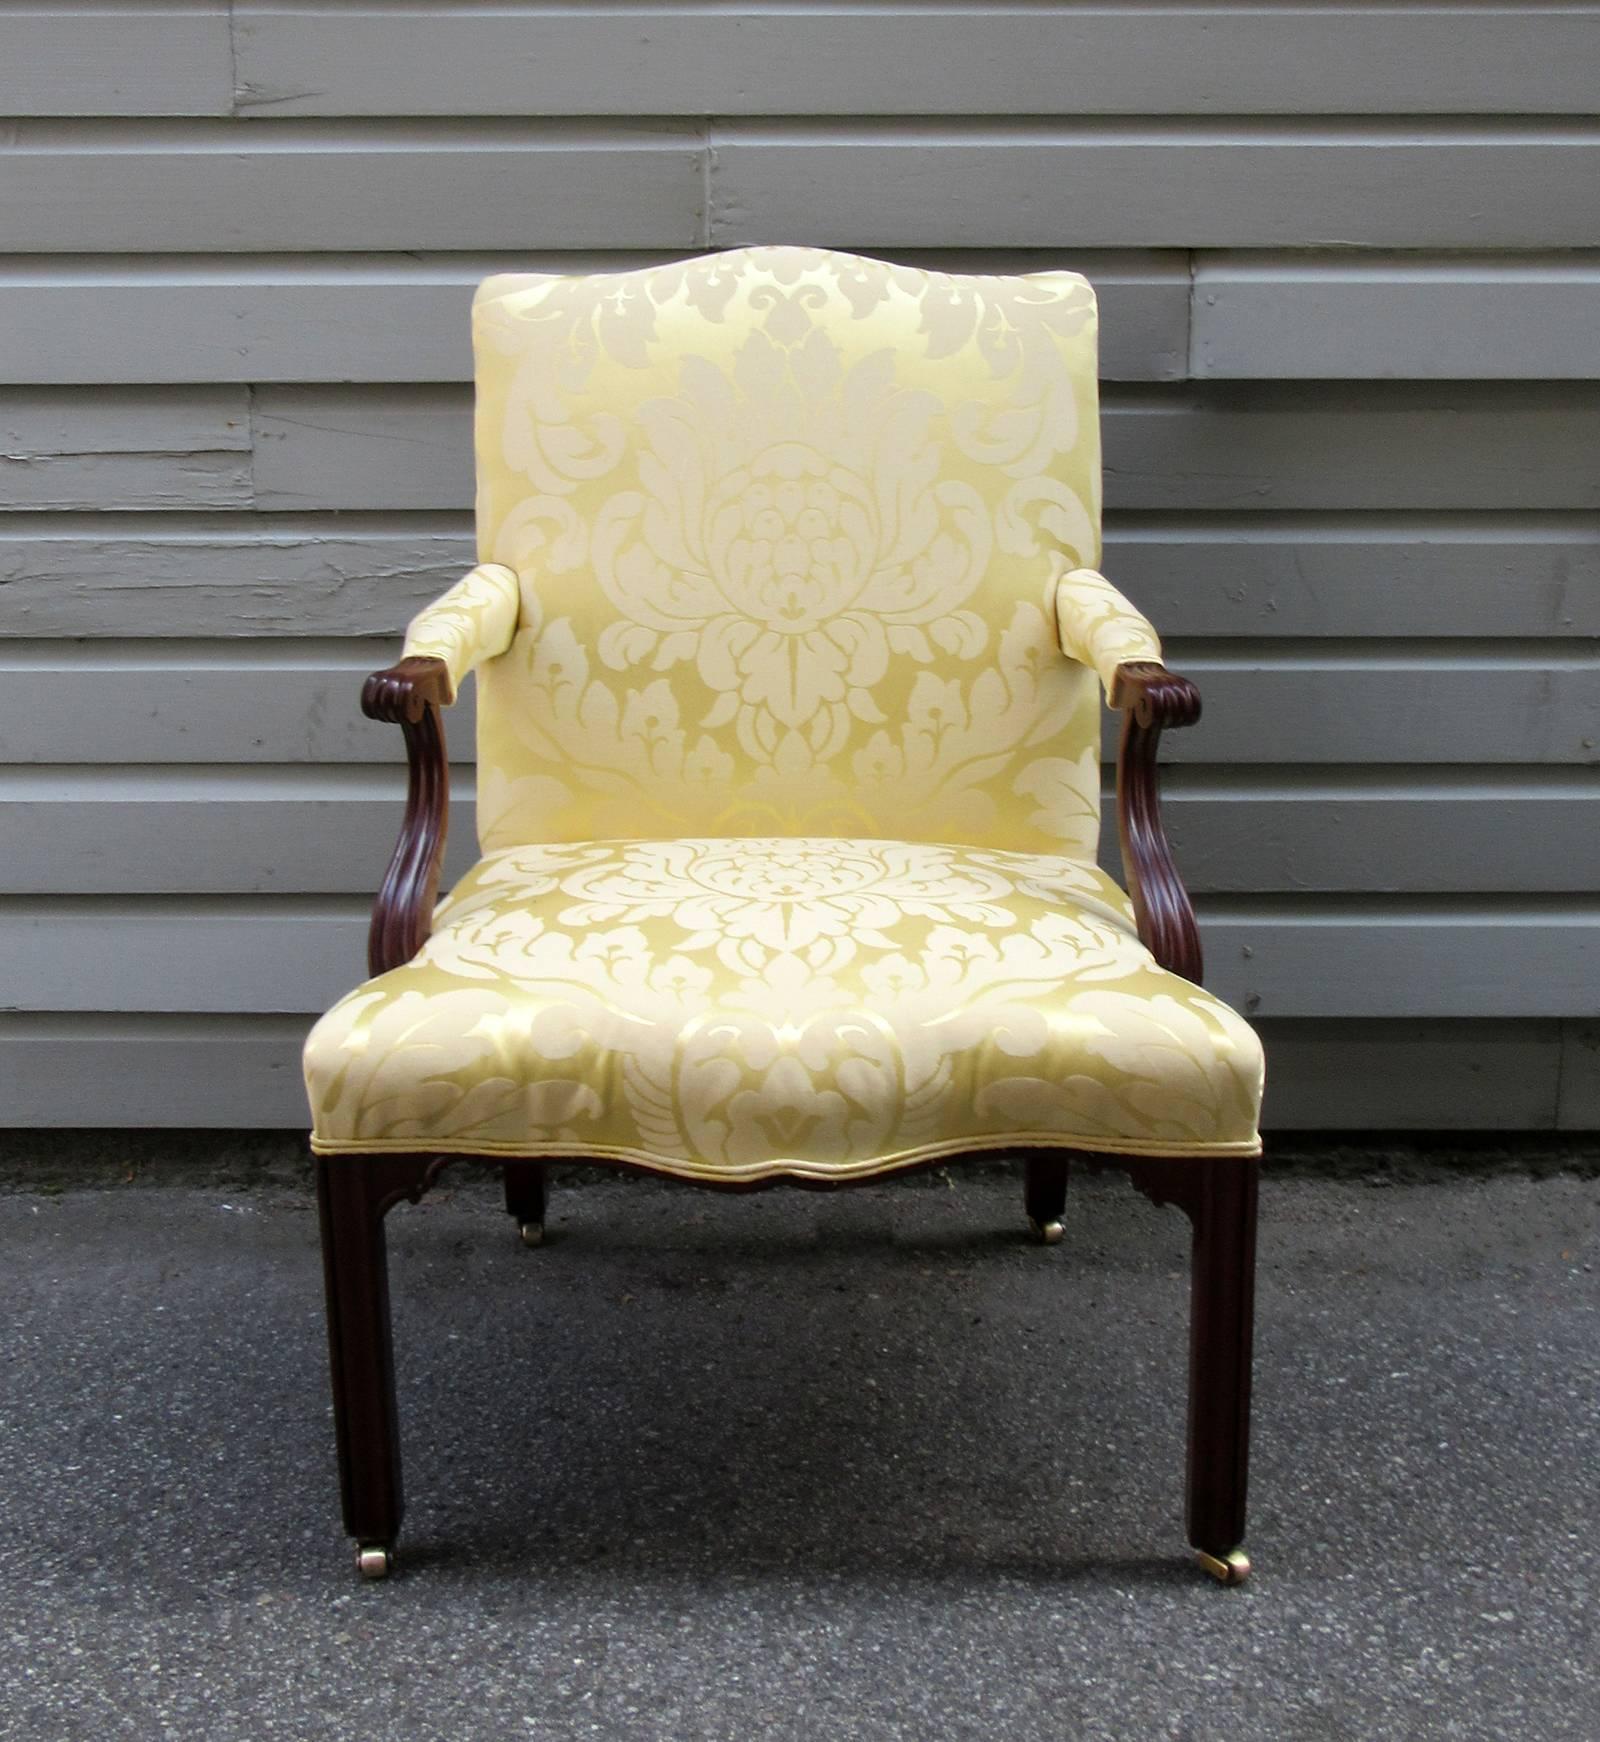 A very fine English Chippendale mahogany open armchair, circa 1760, featuring Marlborough leg, Chinese brackets, grooved arms and new yellow damask upholstery. The casters are new.